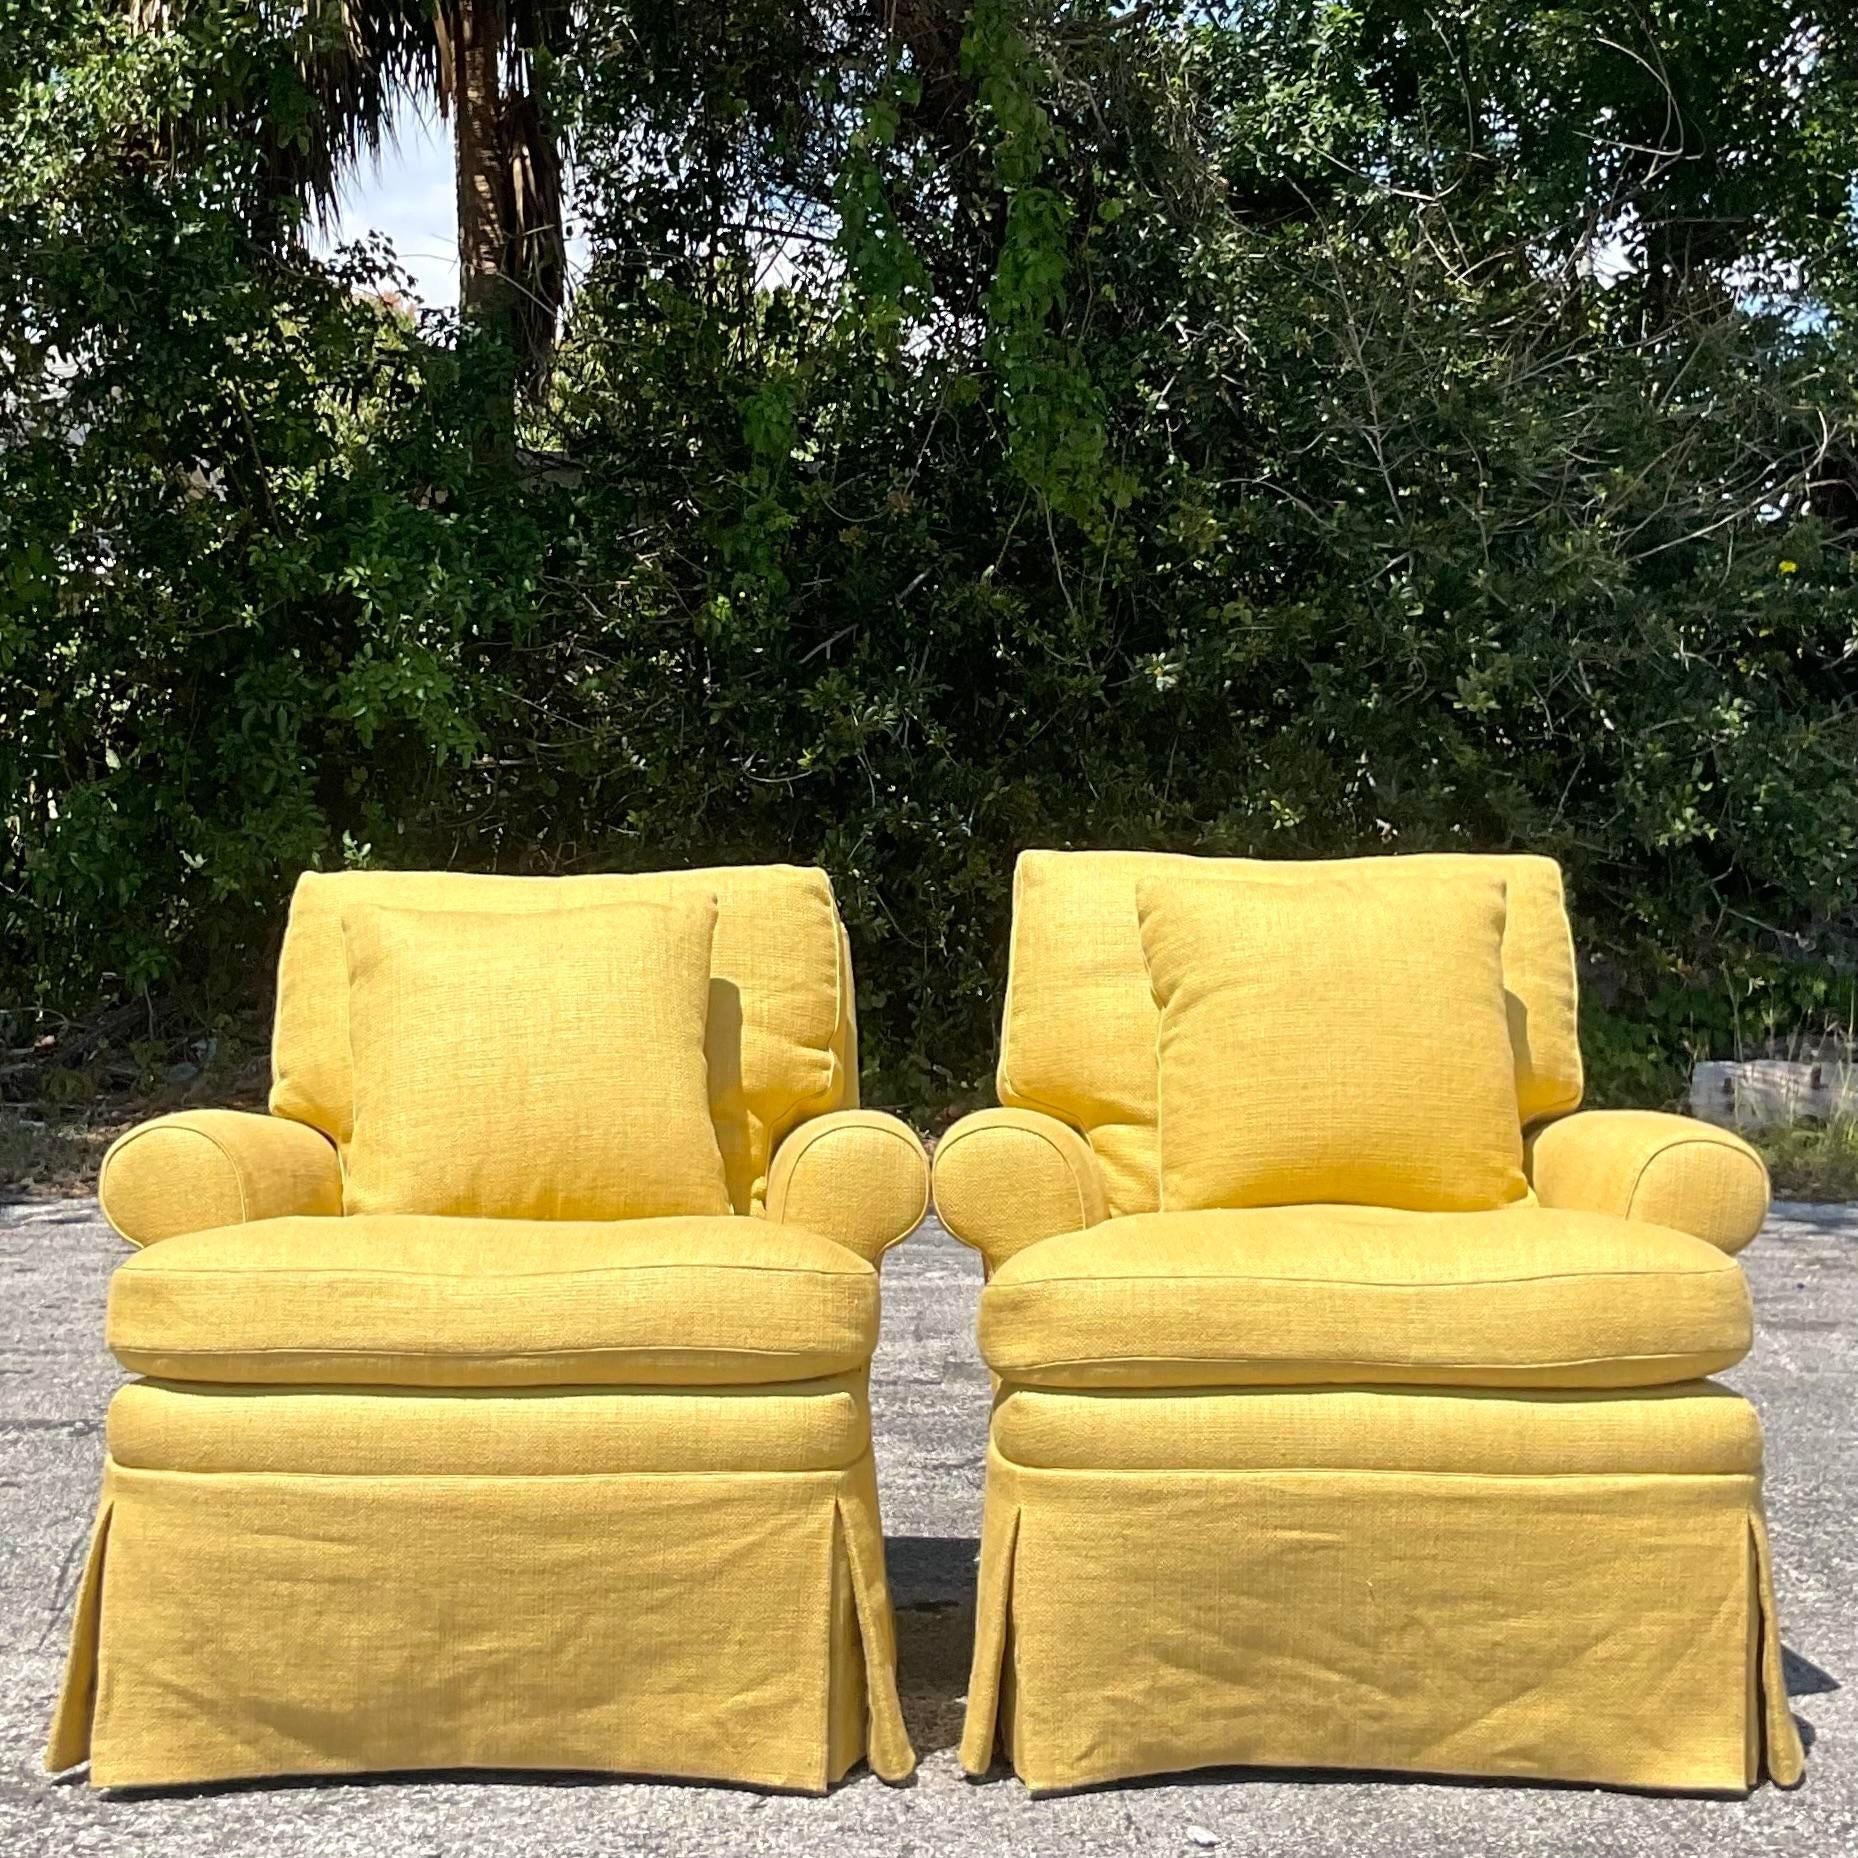 20th Century Vintage Regency Chartreuse Down Lounge Chairs - a Pair For Sale